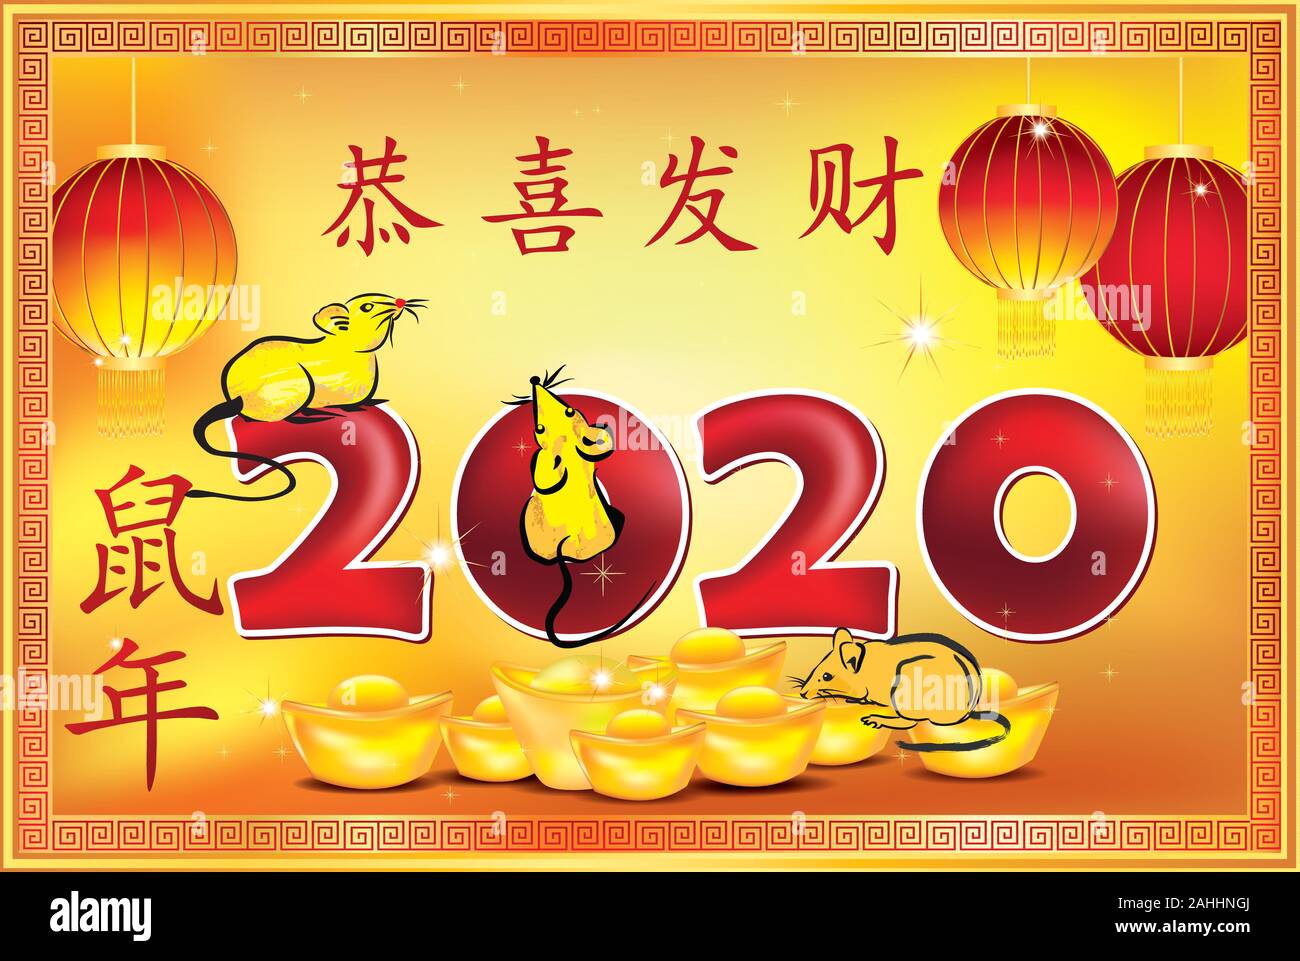 Happy Chinese New Year 2020! - yellow and red greeting card. Ideograms translation: Congratulations and make fortune. Year of the Rat. Good fortune. Stock Photo